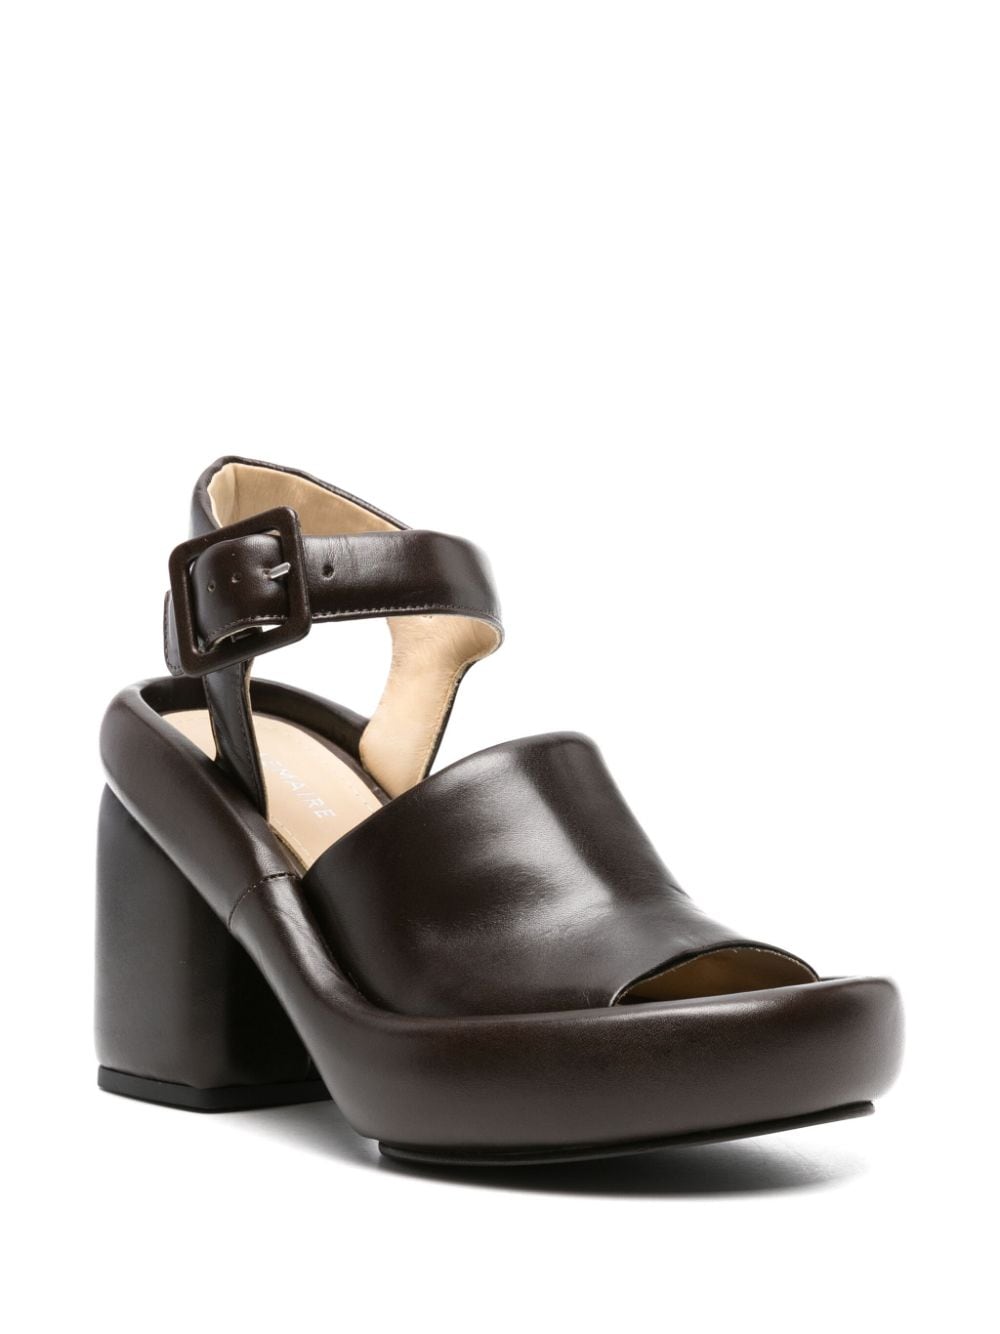 LEMAIRE 105mm padded leather sandals - Bruin